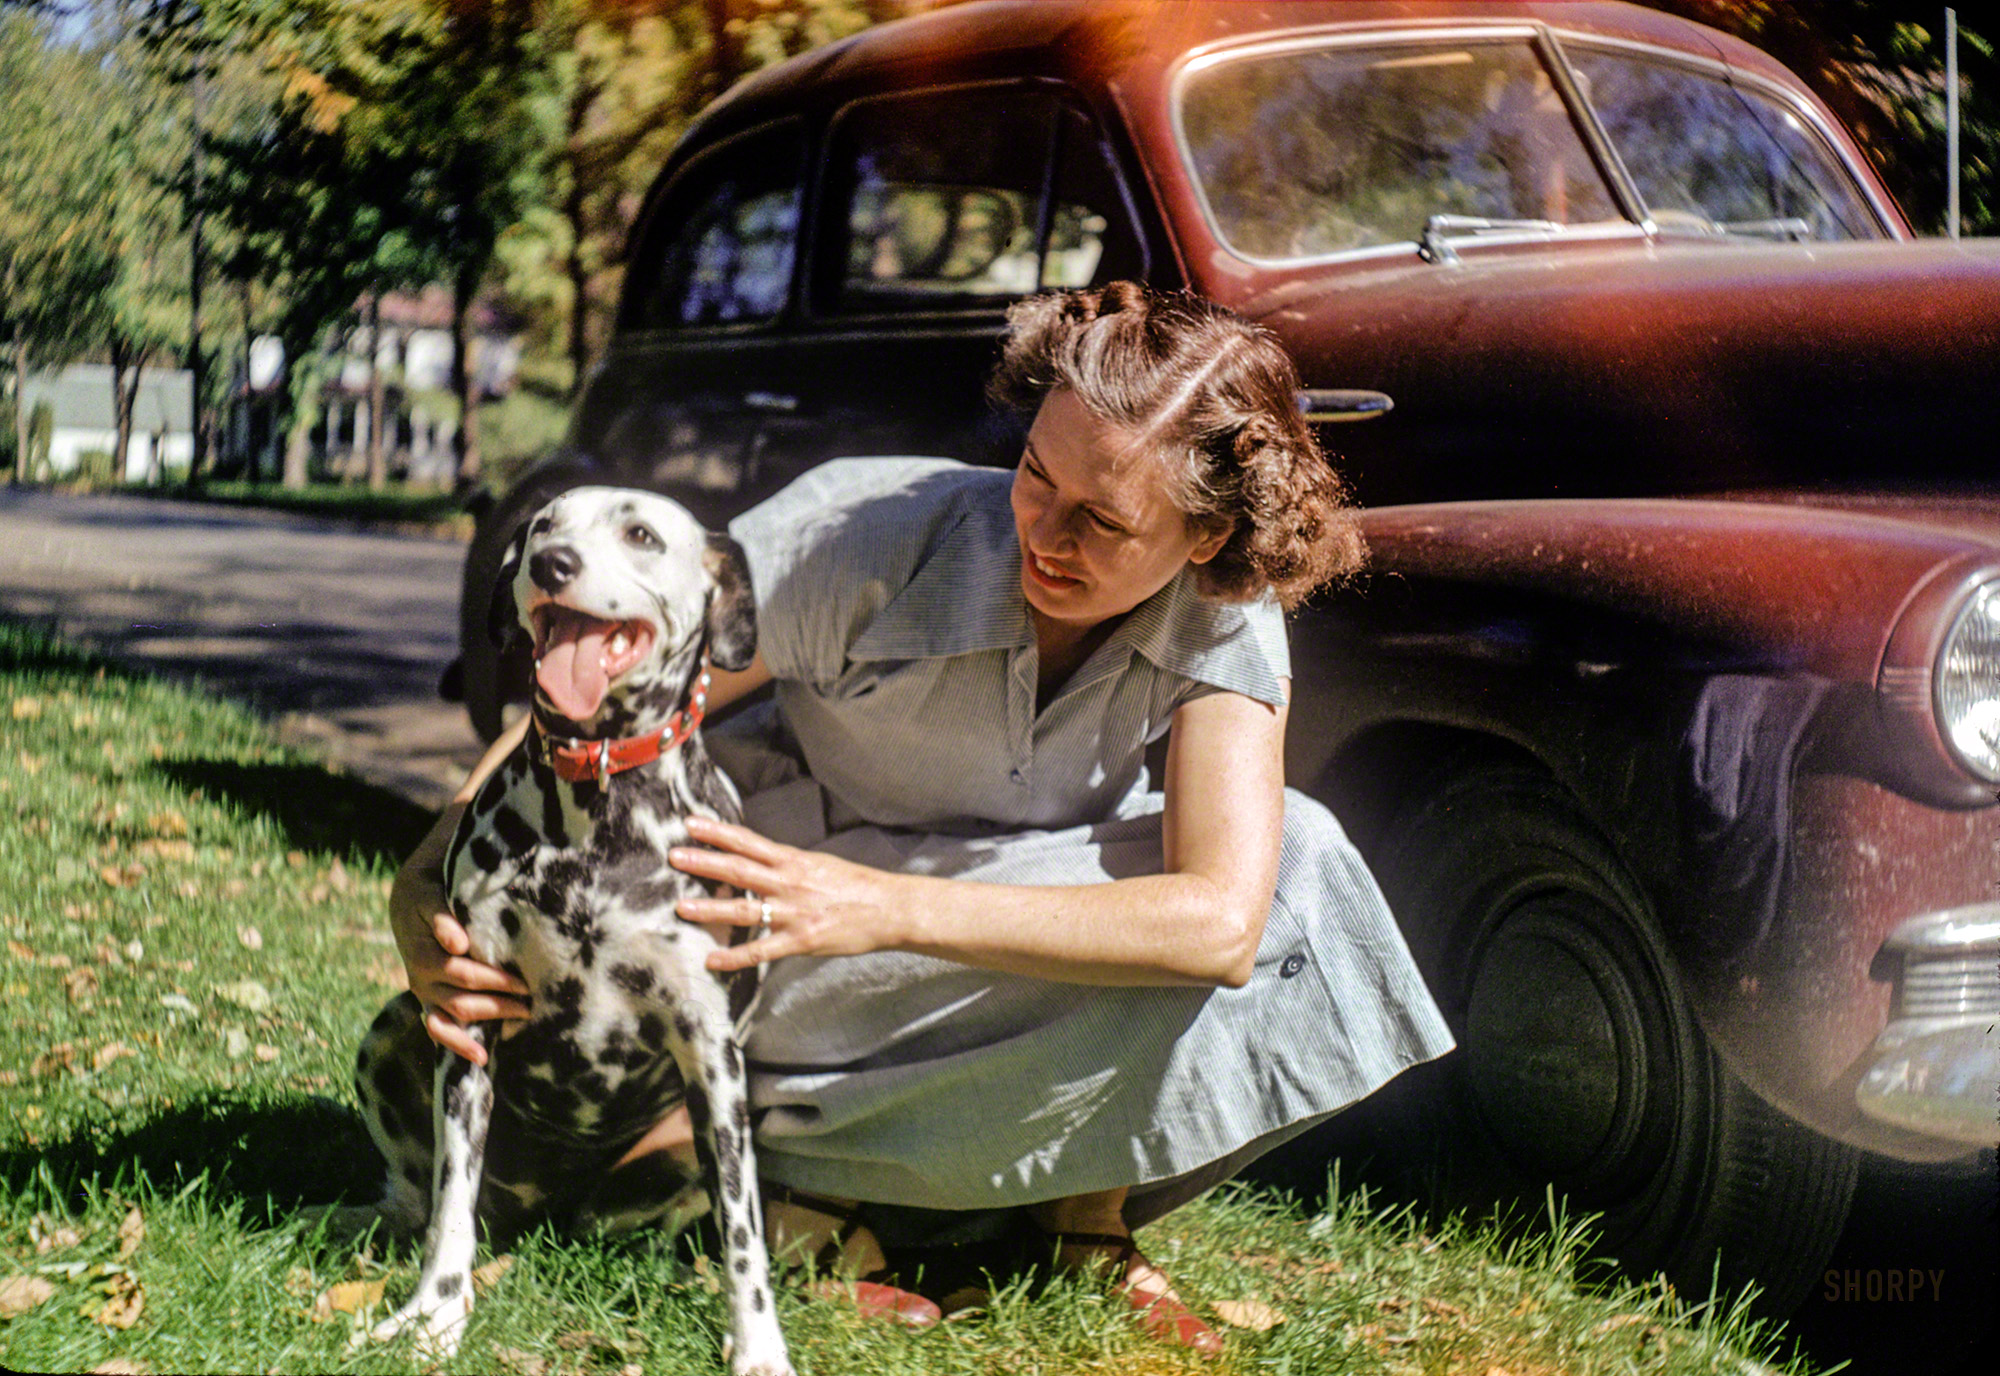 Blue Earth, Minnesota. "Sept. 1951 -- Dottie & Sally." One hon and one Dalmatian. Though the dog might look spotty, she's not Dottie, she's Sally. 35mm Kodachrome by posthumous Shorpy contributors Grace or Hubert Tuttle. View full size.